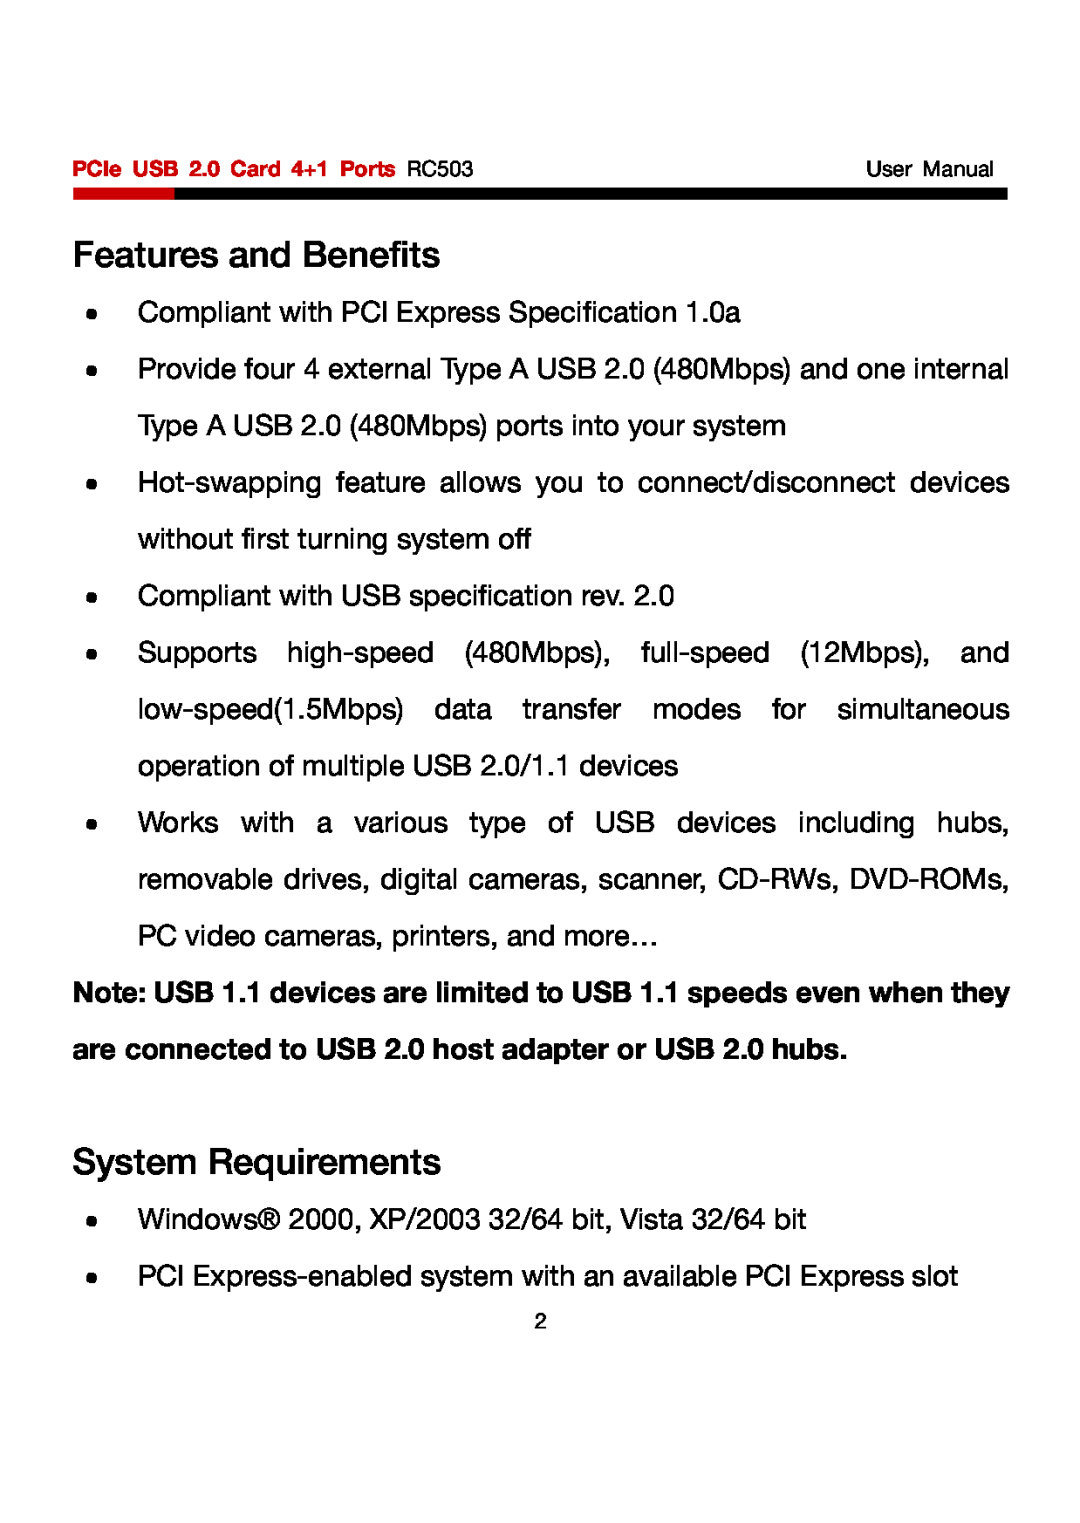 Rosewill RC503 Features and Benefits, System Requirements, are connected to USB 2.0 host adapter or USB 2.0 hubs 